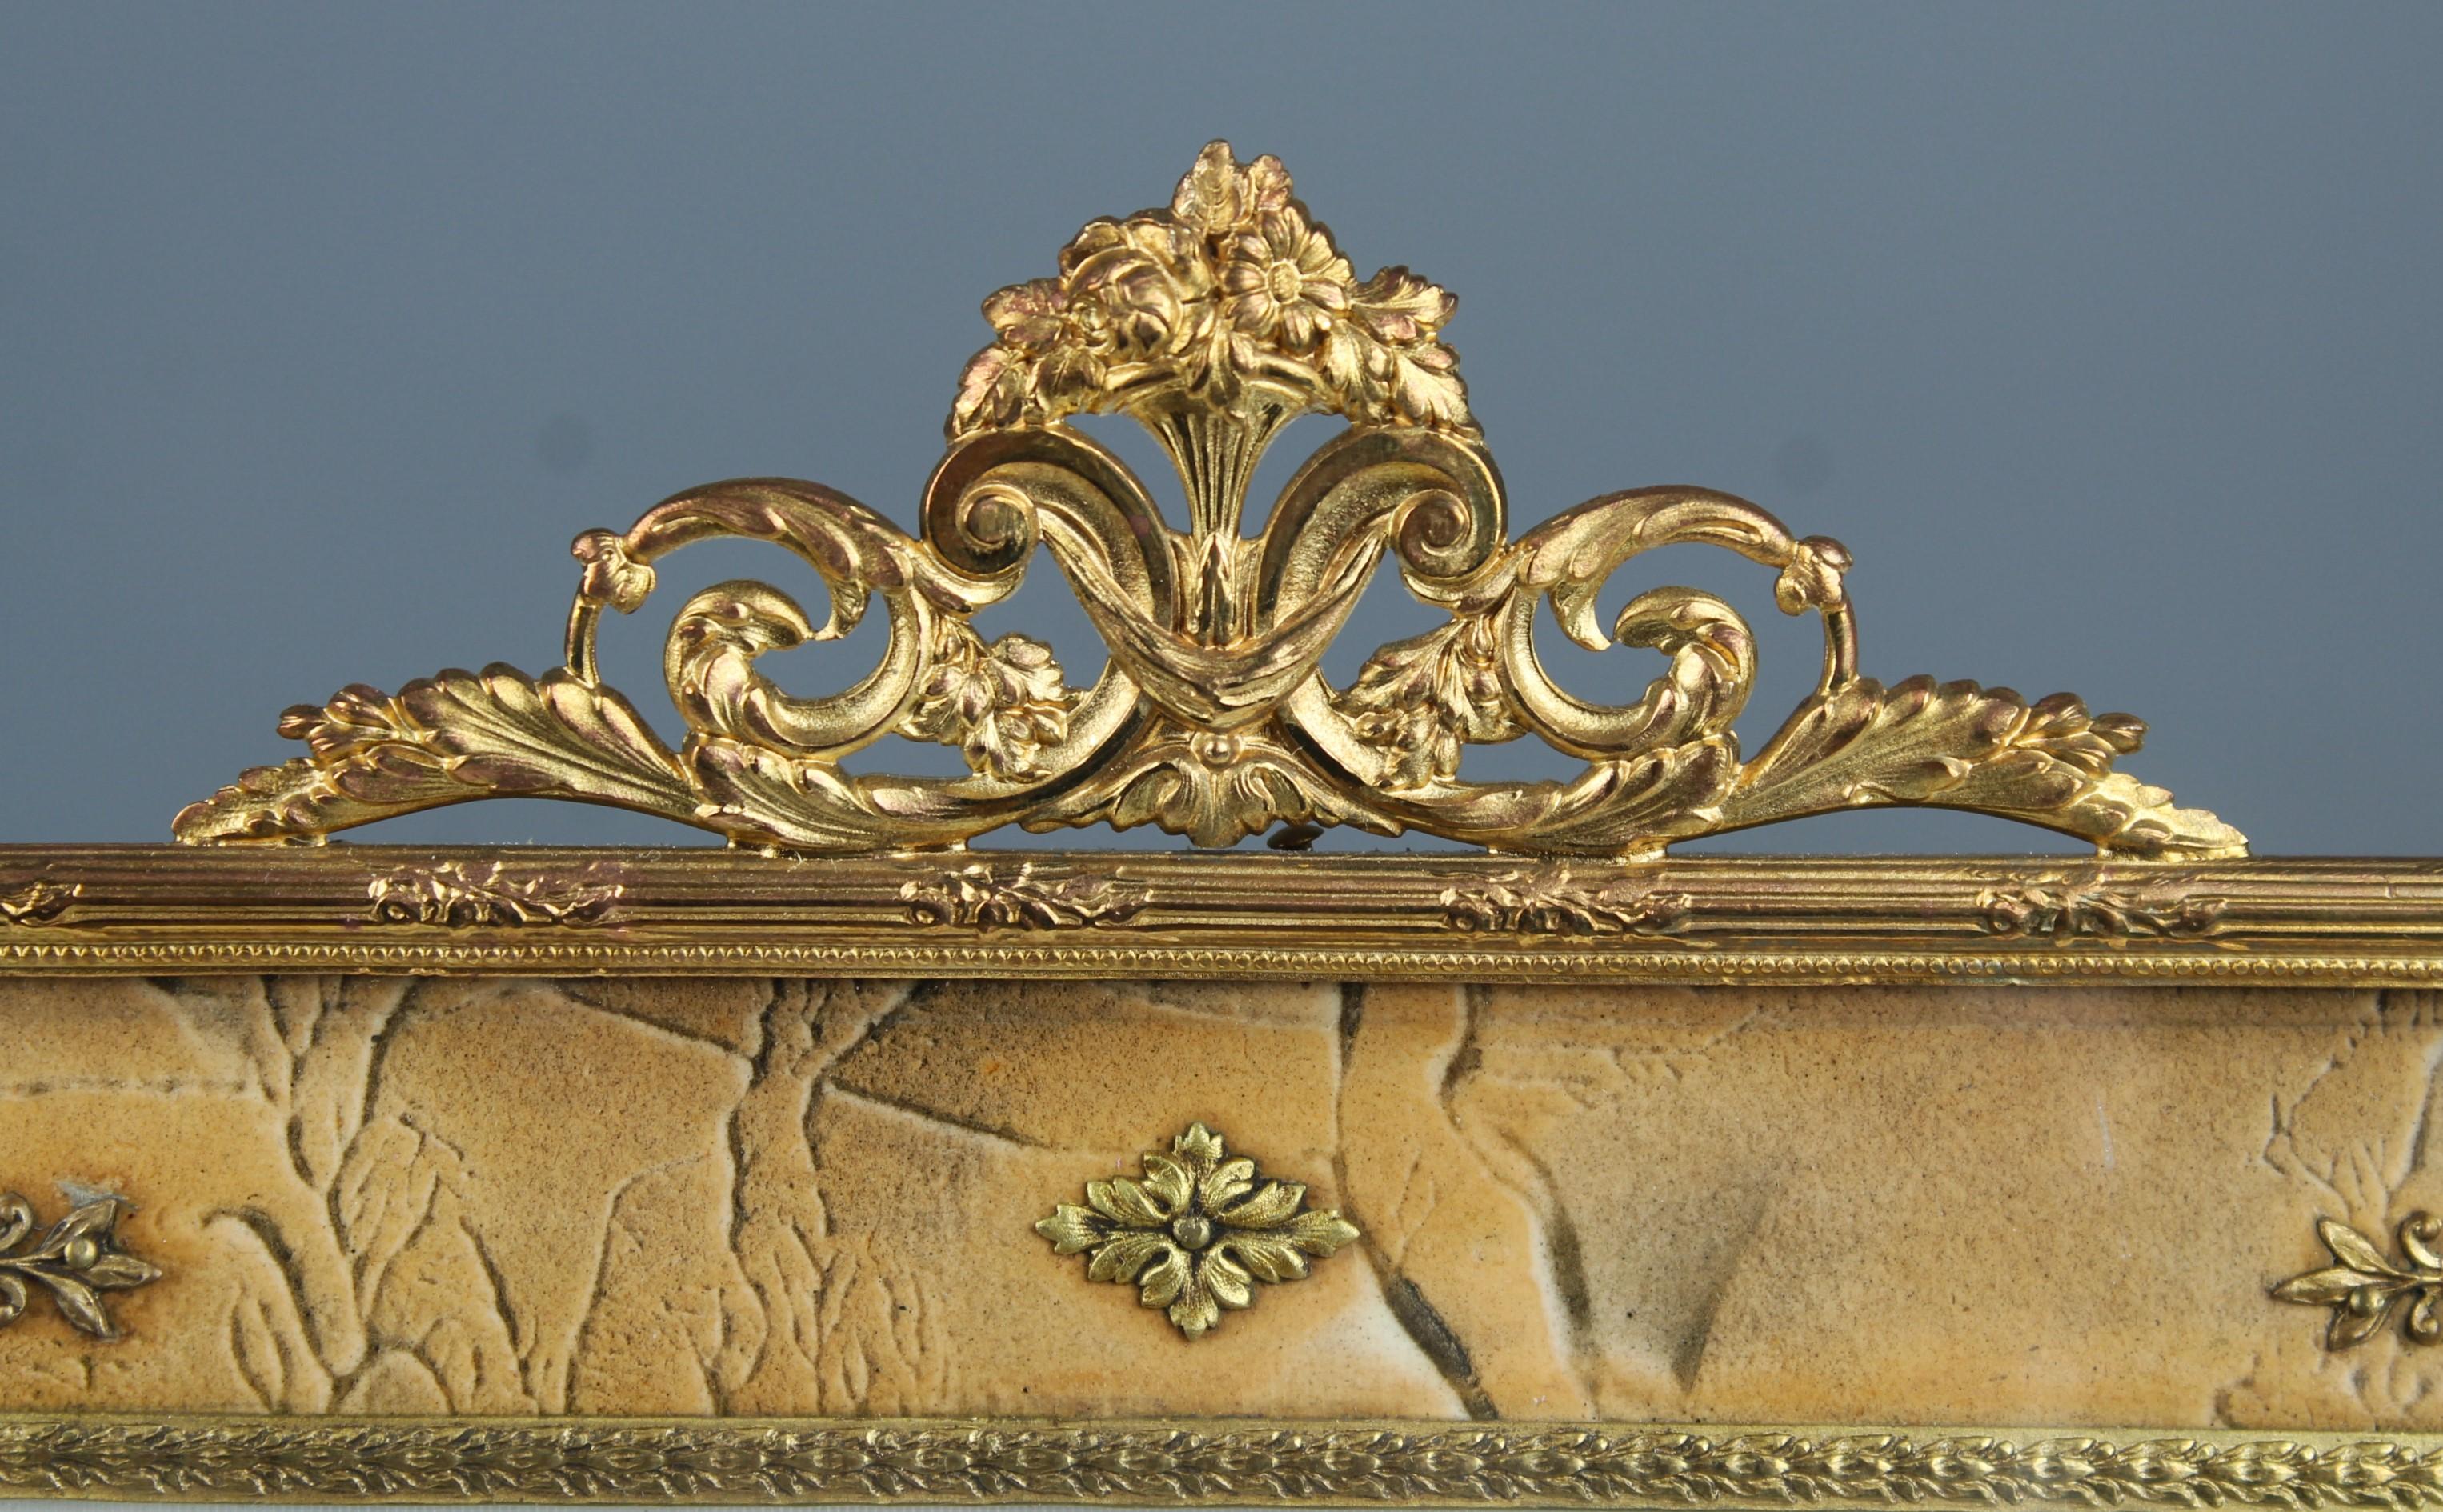 Beautiful victorian picture frame from France circa 1890.

